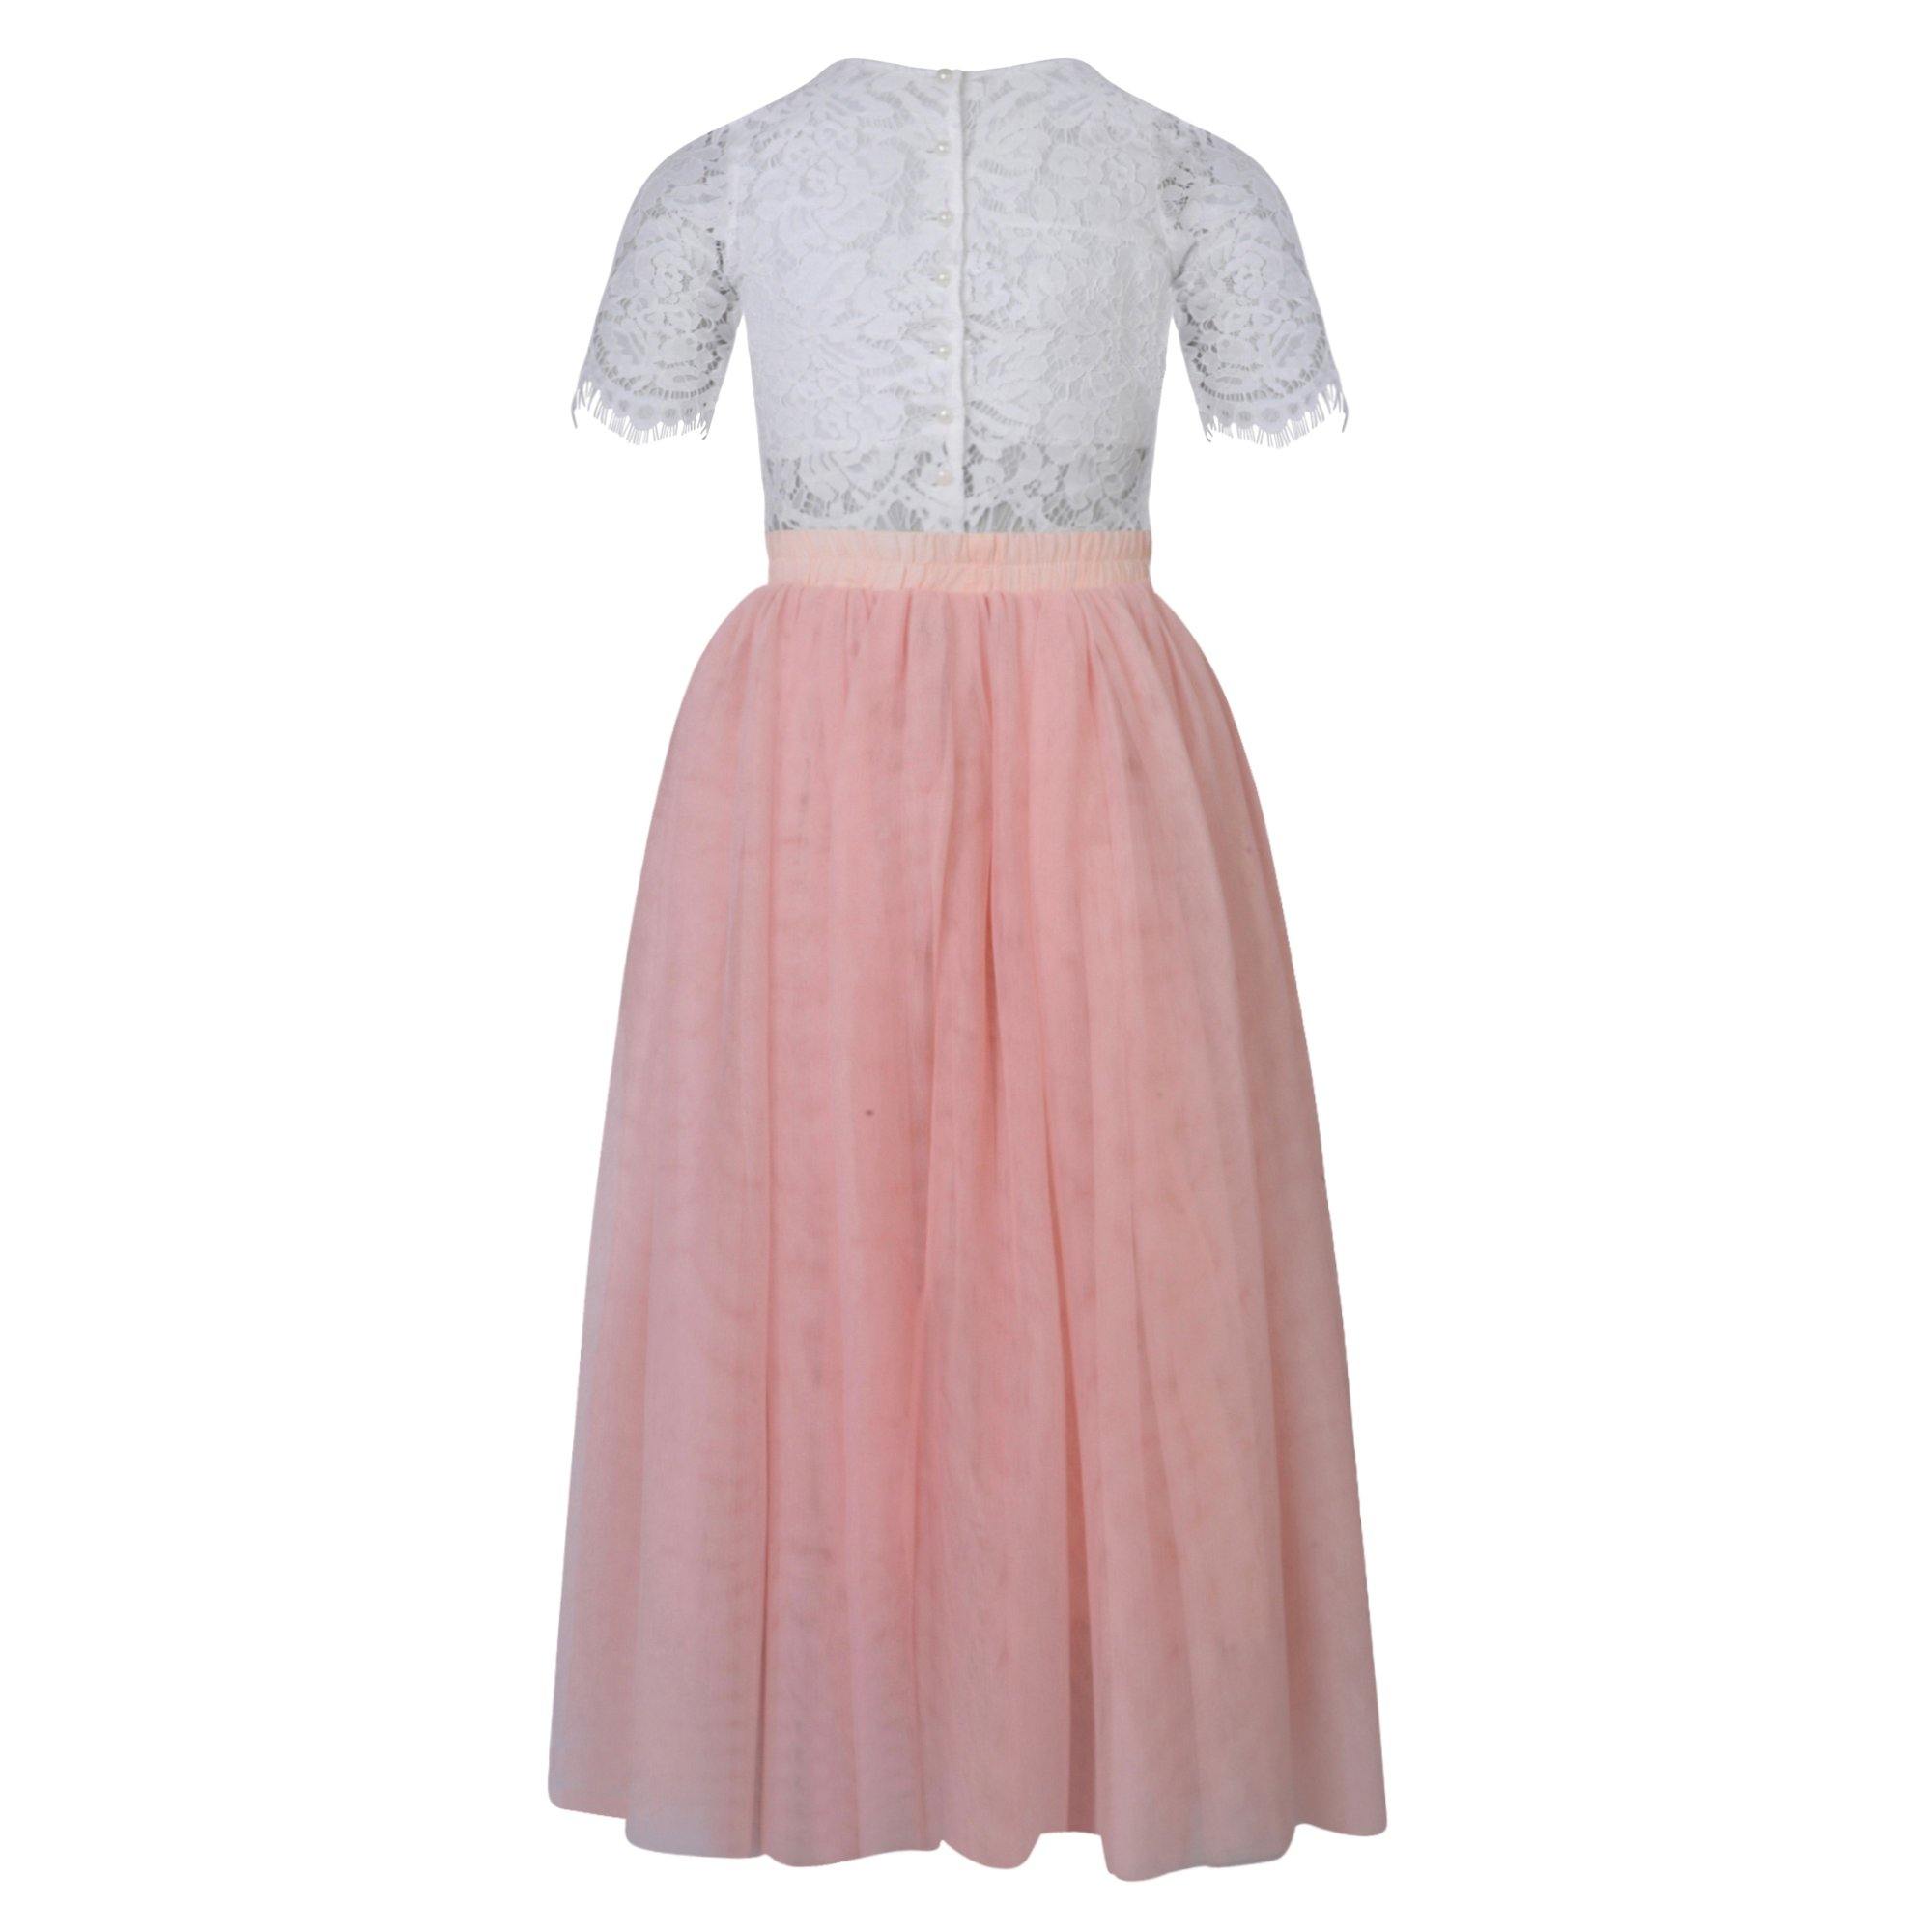 Felicity Couture girls outfit in blush